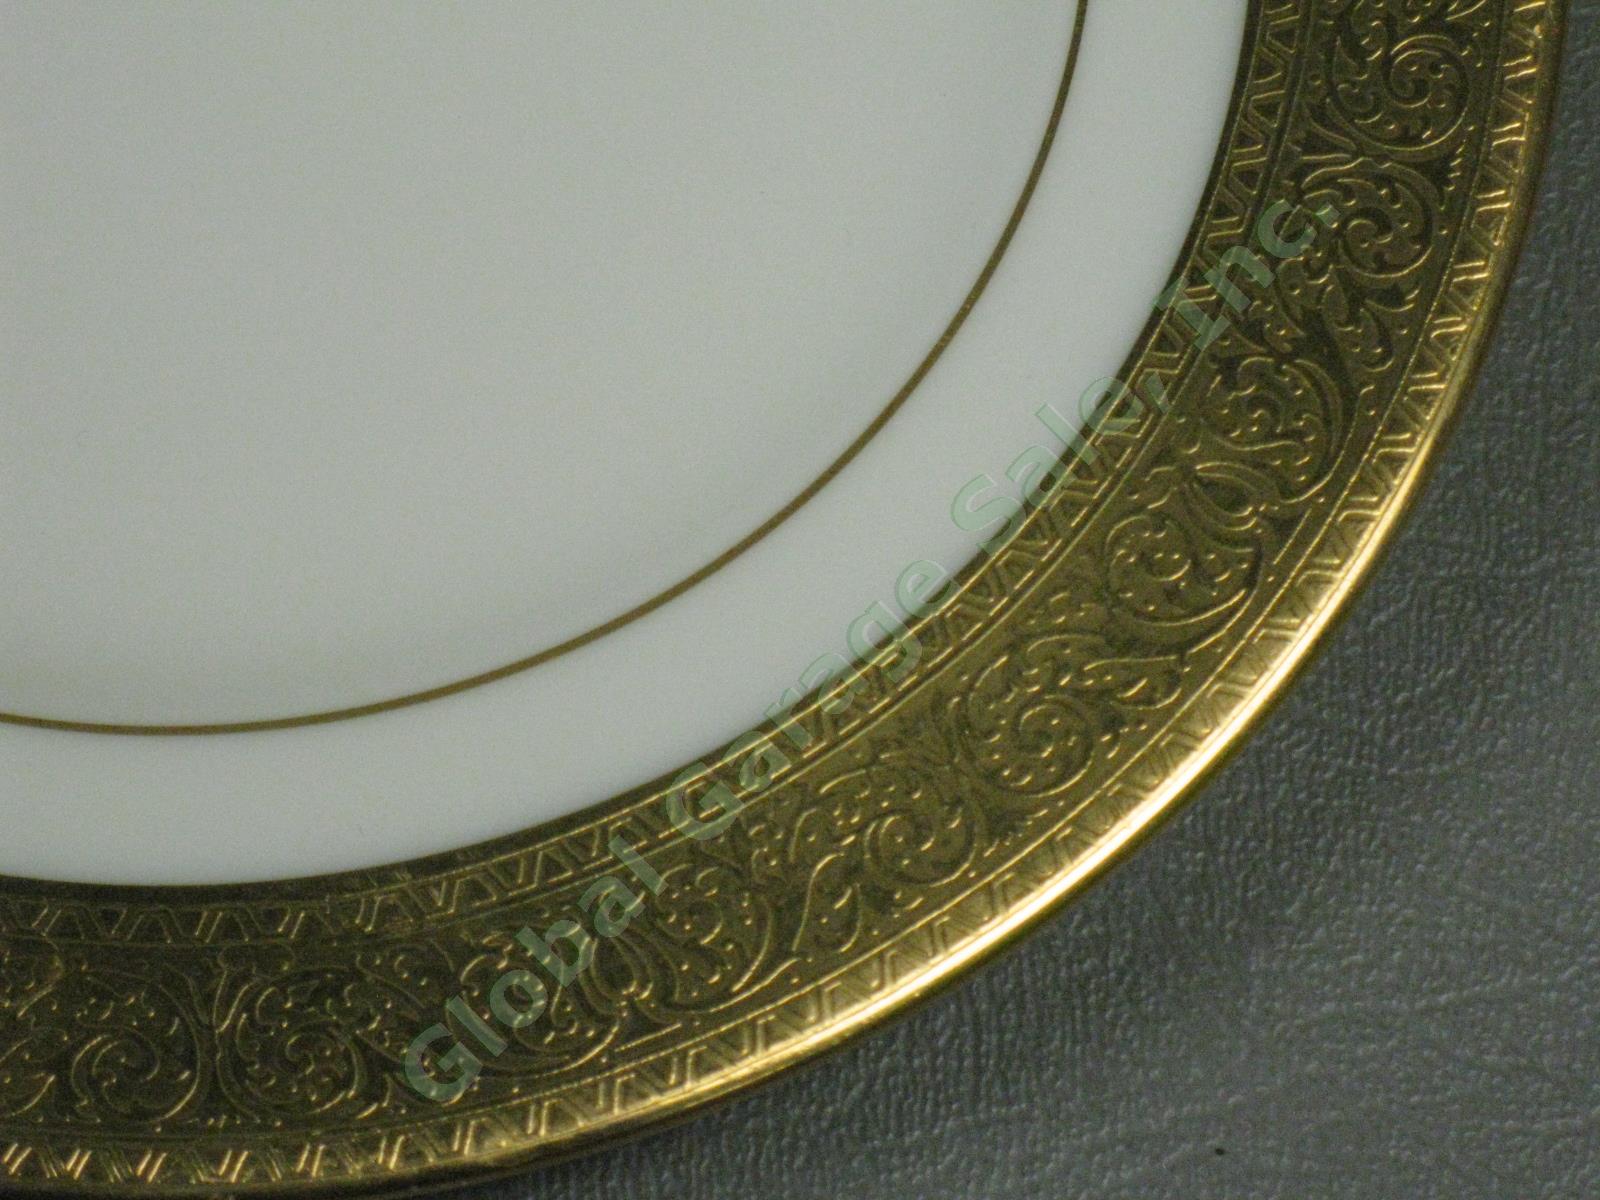 7 Lenox Westchester China M139 Presidential Gold Encrusted 6-3/8" Bread Plates 2